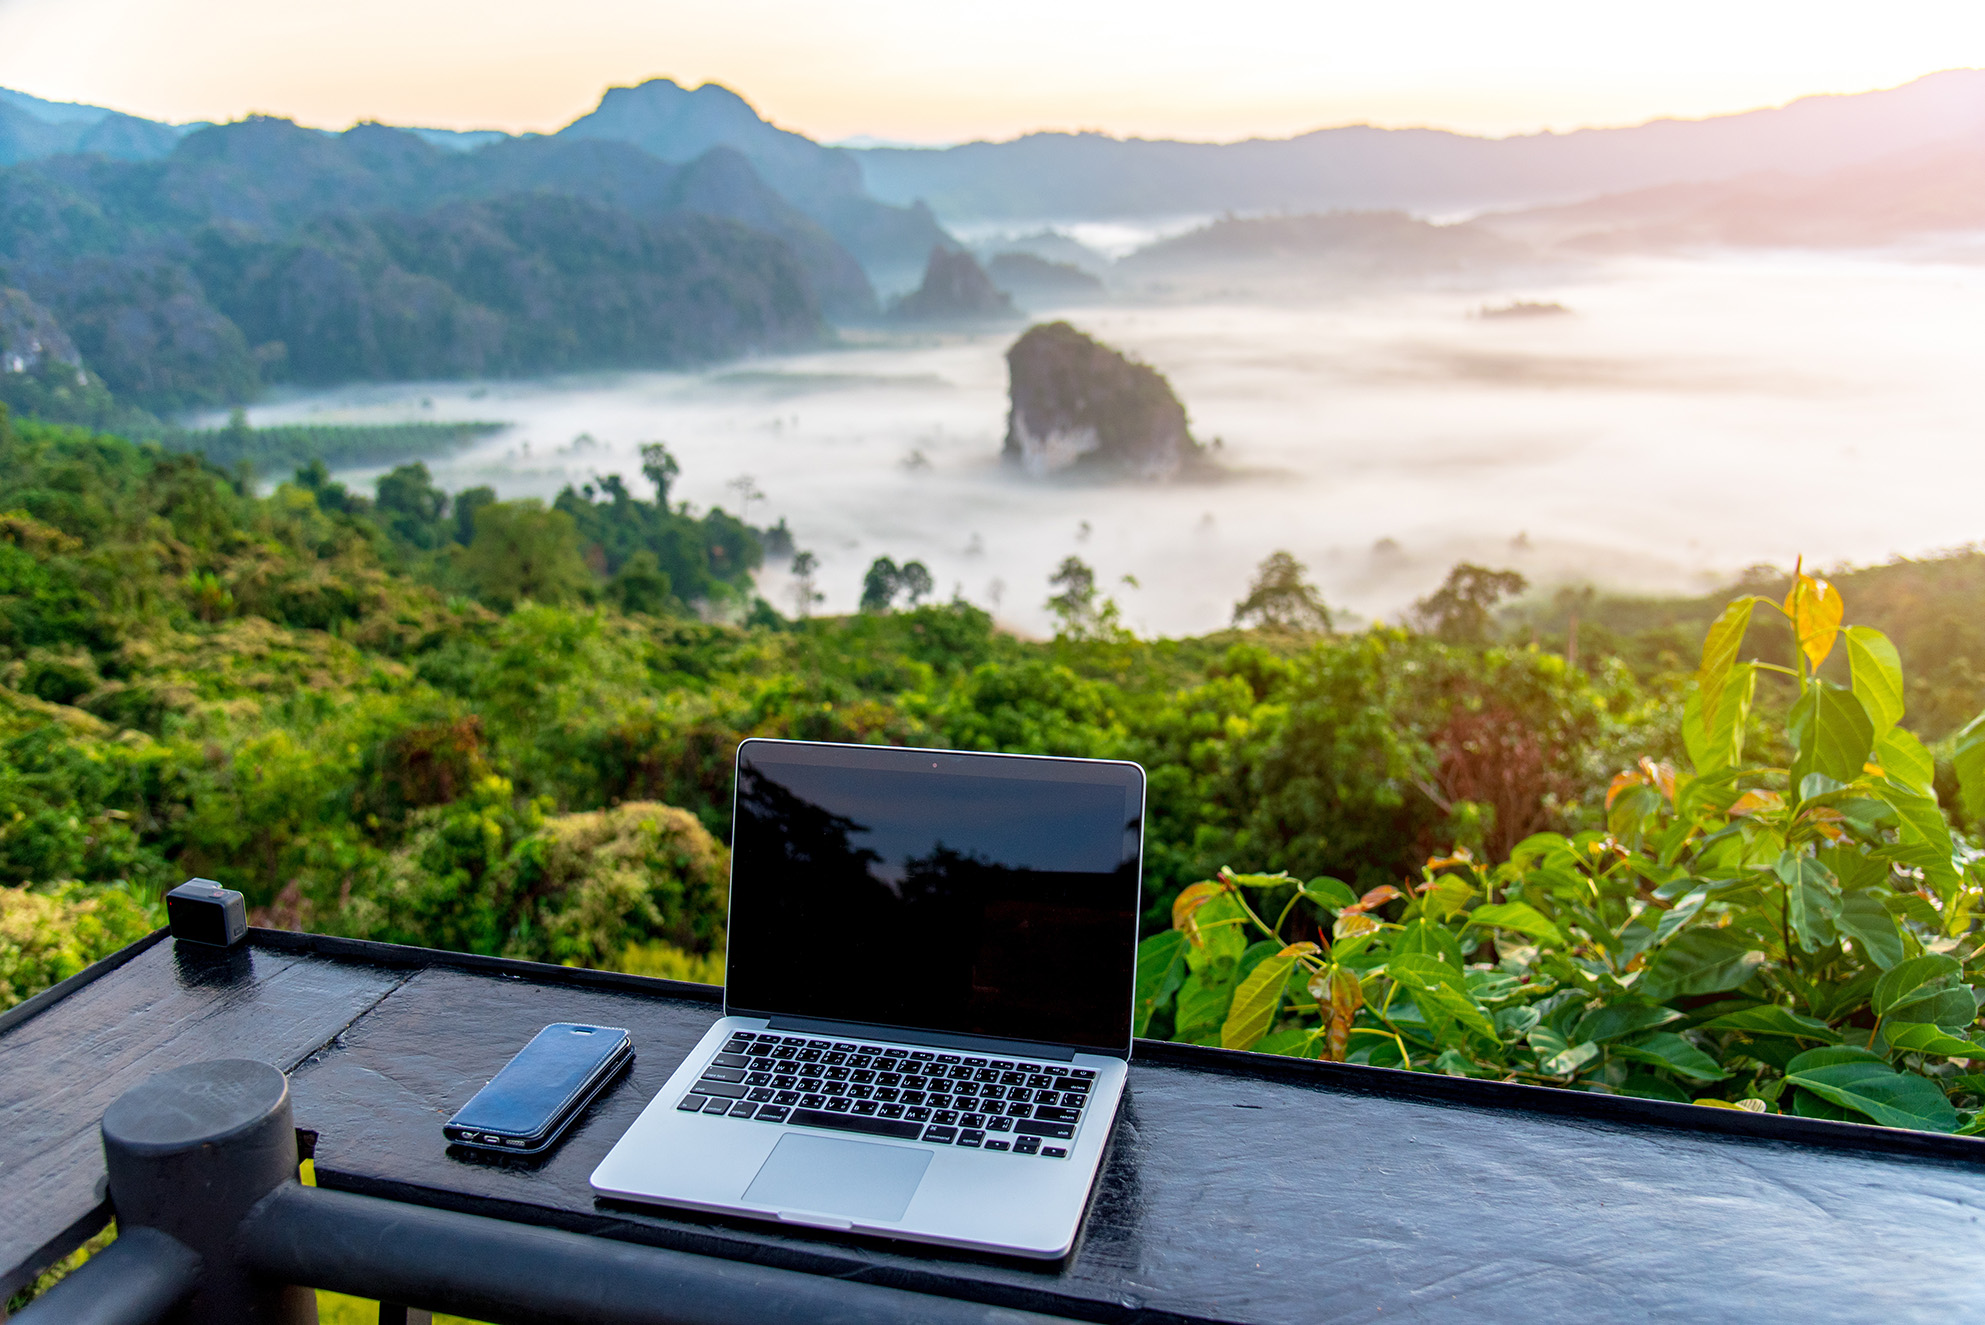 Laptop and phone on a table with a view of a mountain